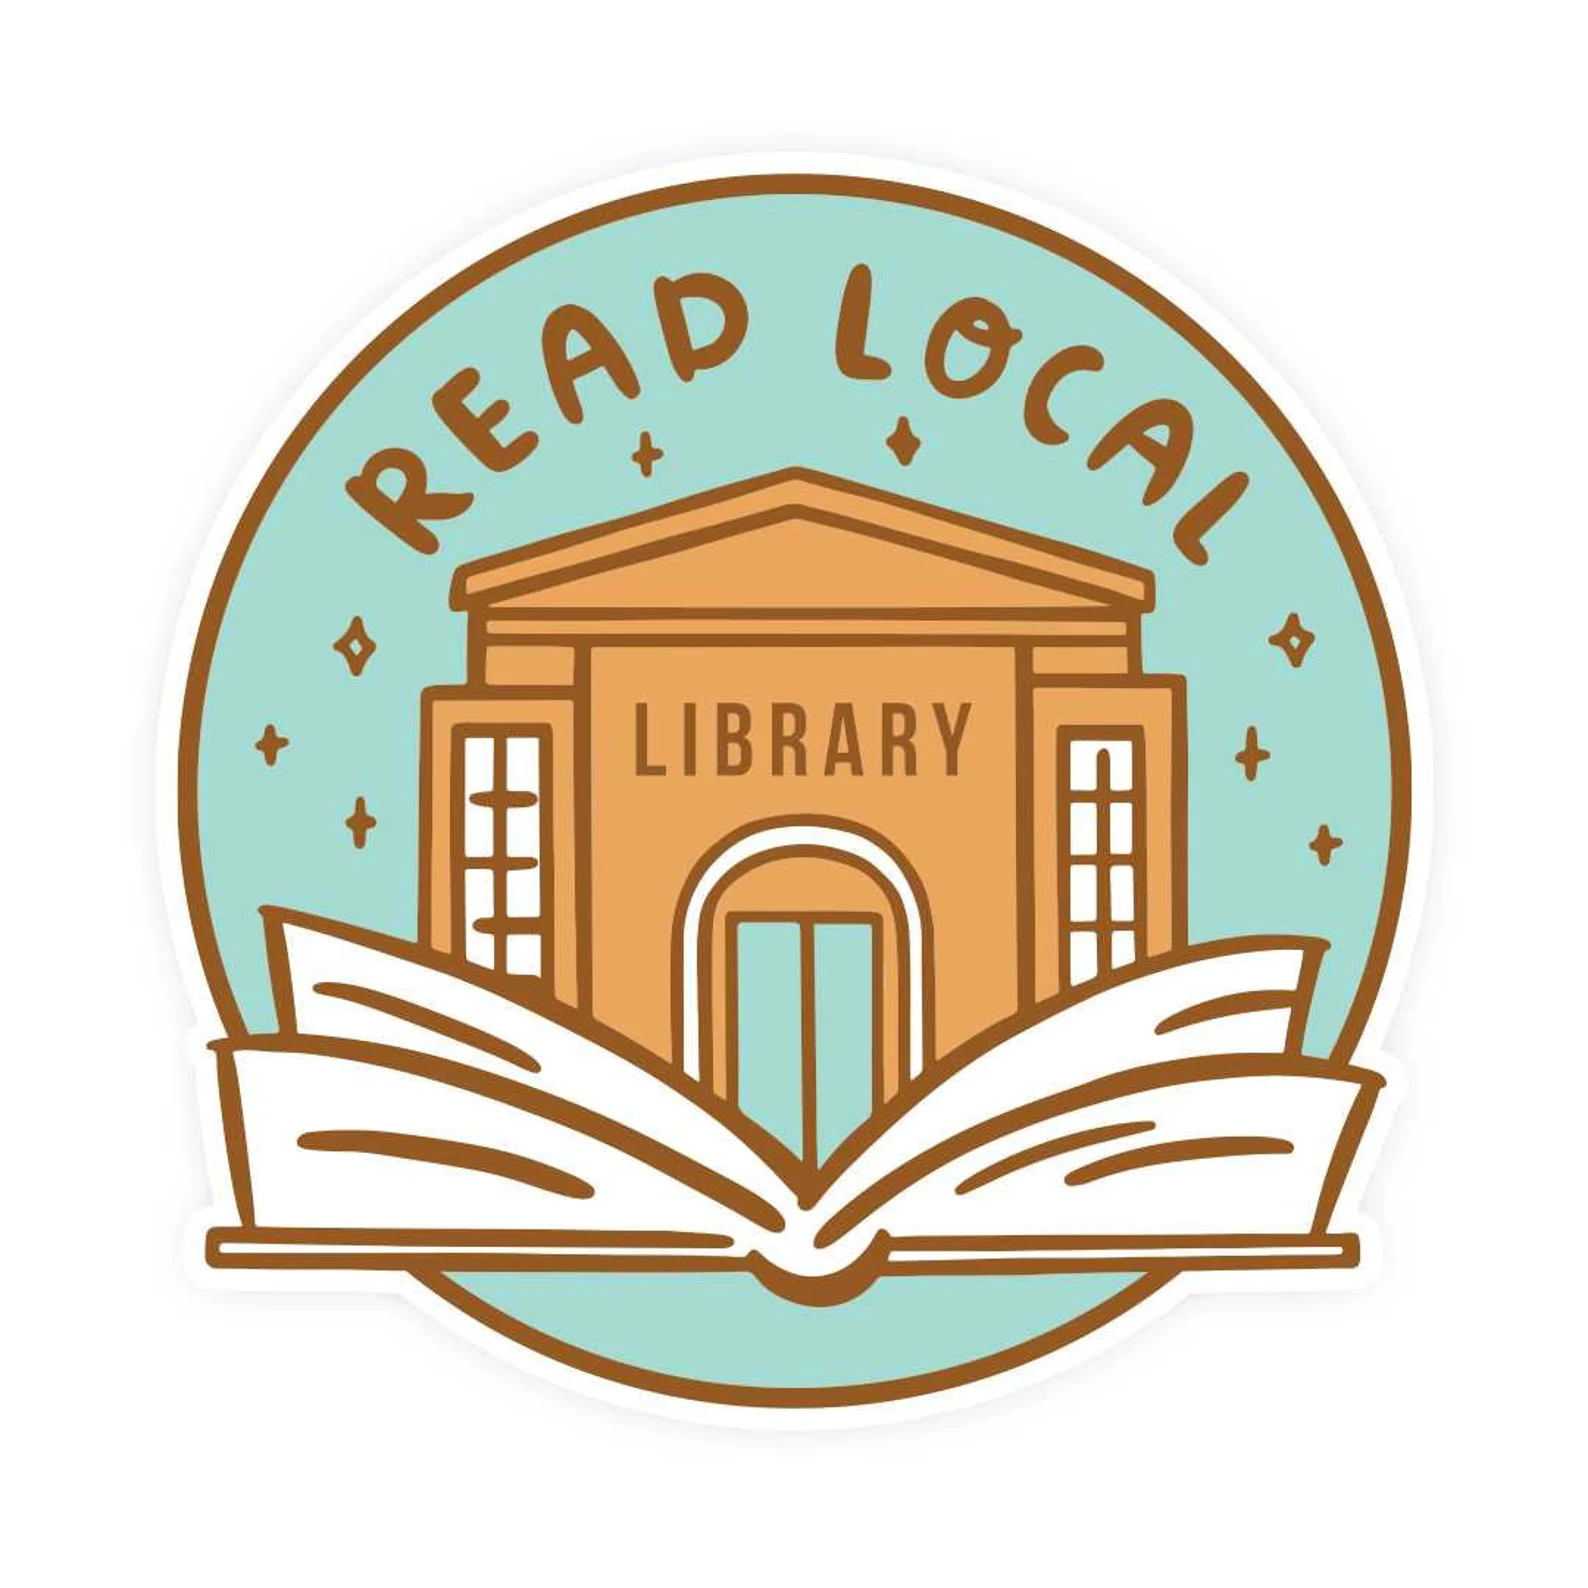 image of a sticker featuring a library with the text "read local."